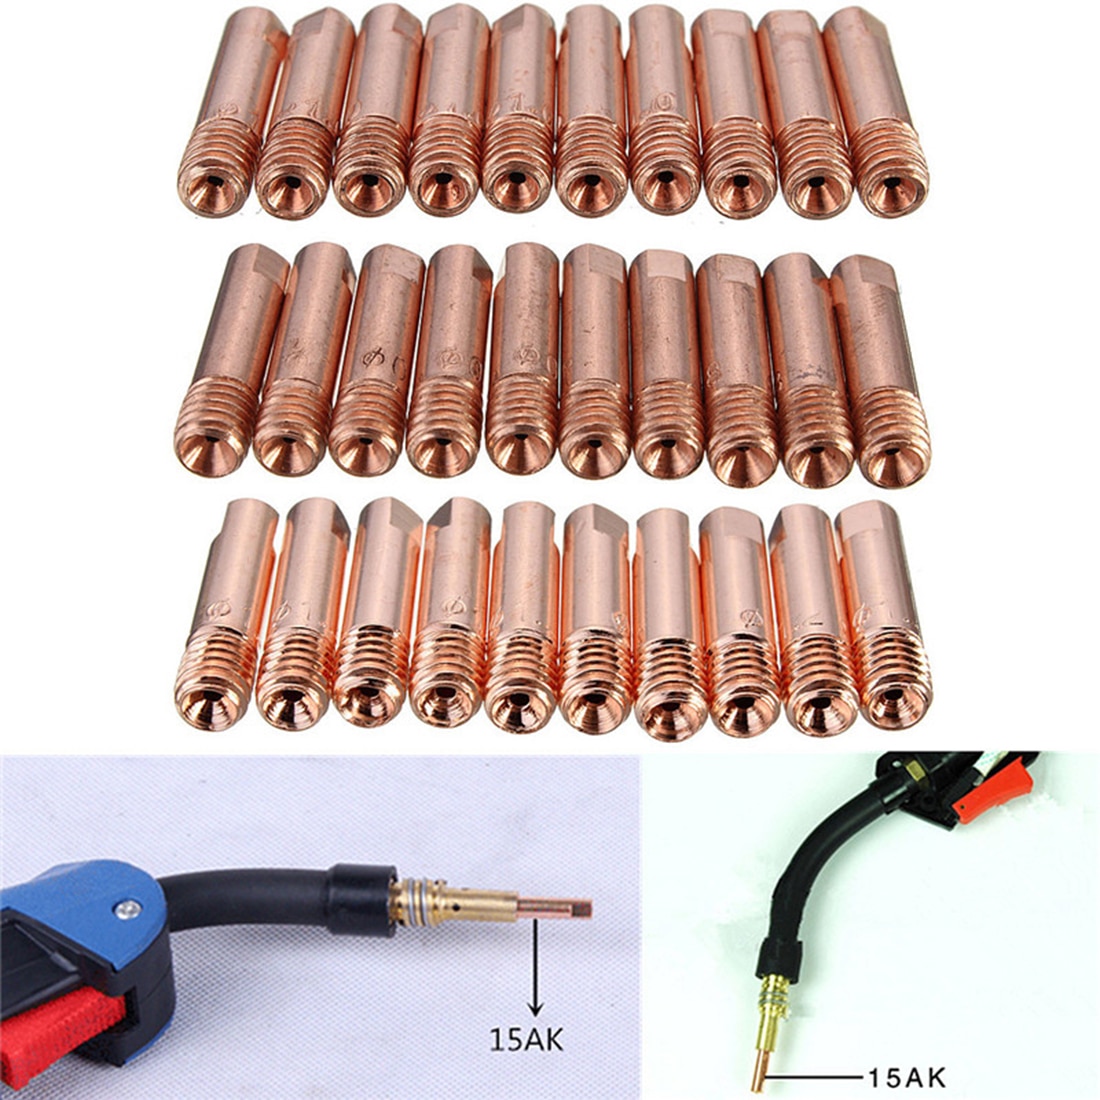 Hot 10pcs MB-15AK M6*25mm MIG/MAG Welding Torch Contact Tip Gas Nozzle 0.8/1.0/1.2mm Mig Welding Accessories Torch Contact Tip